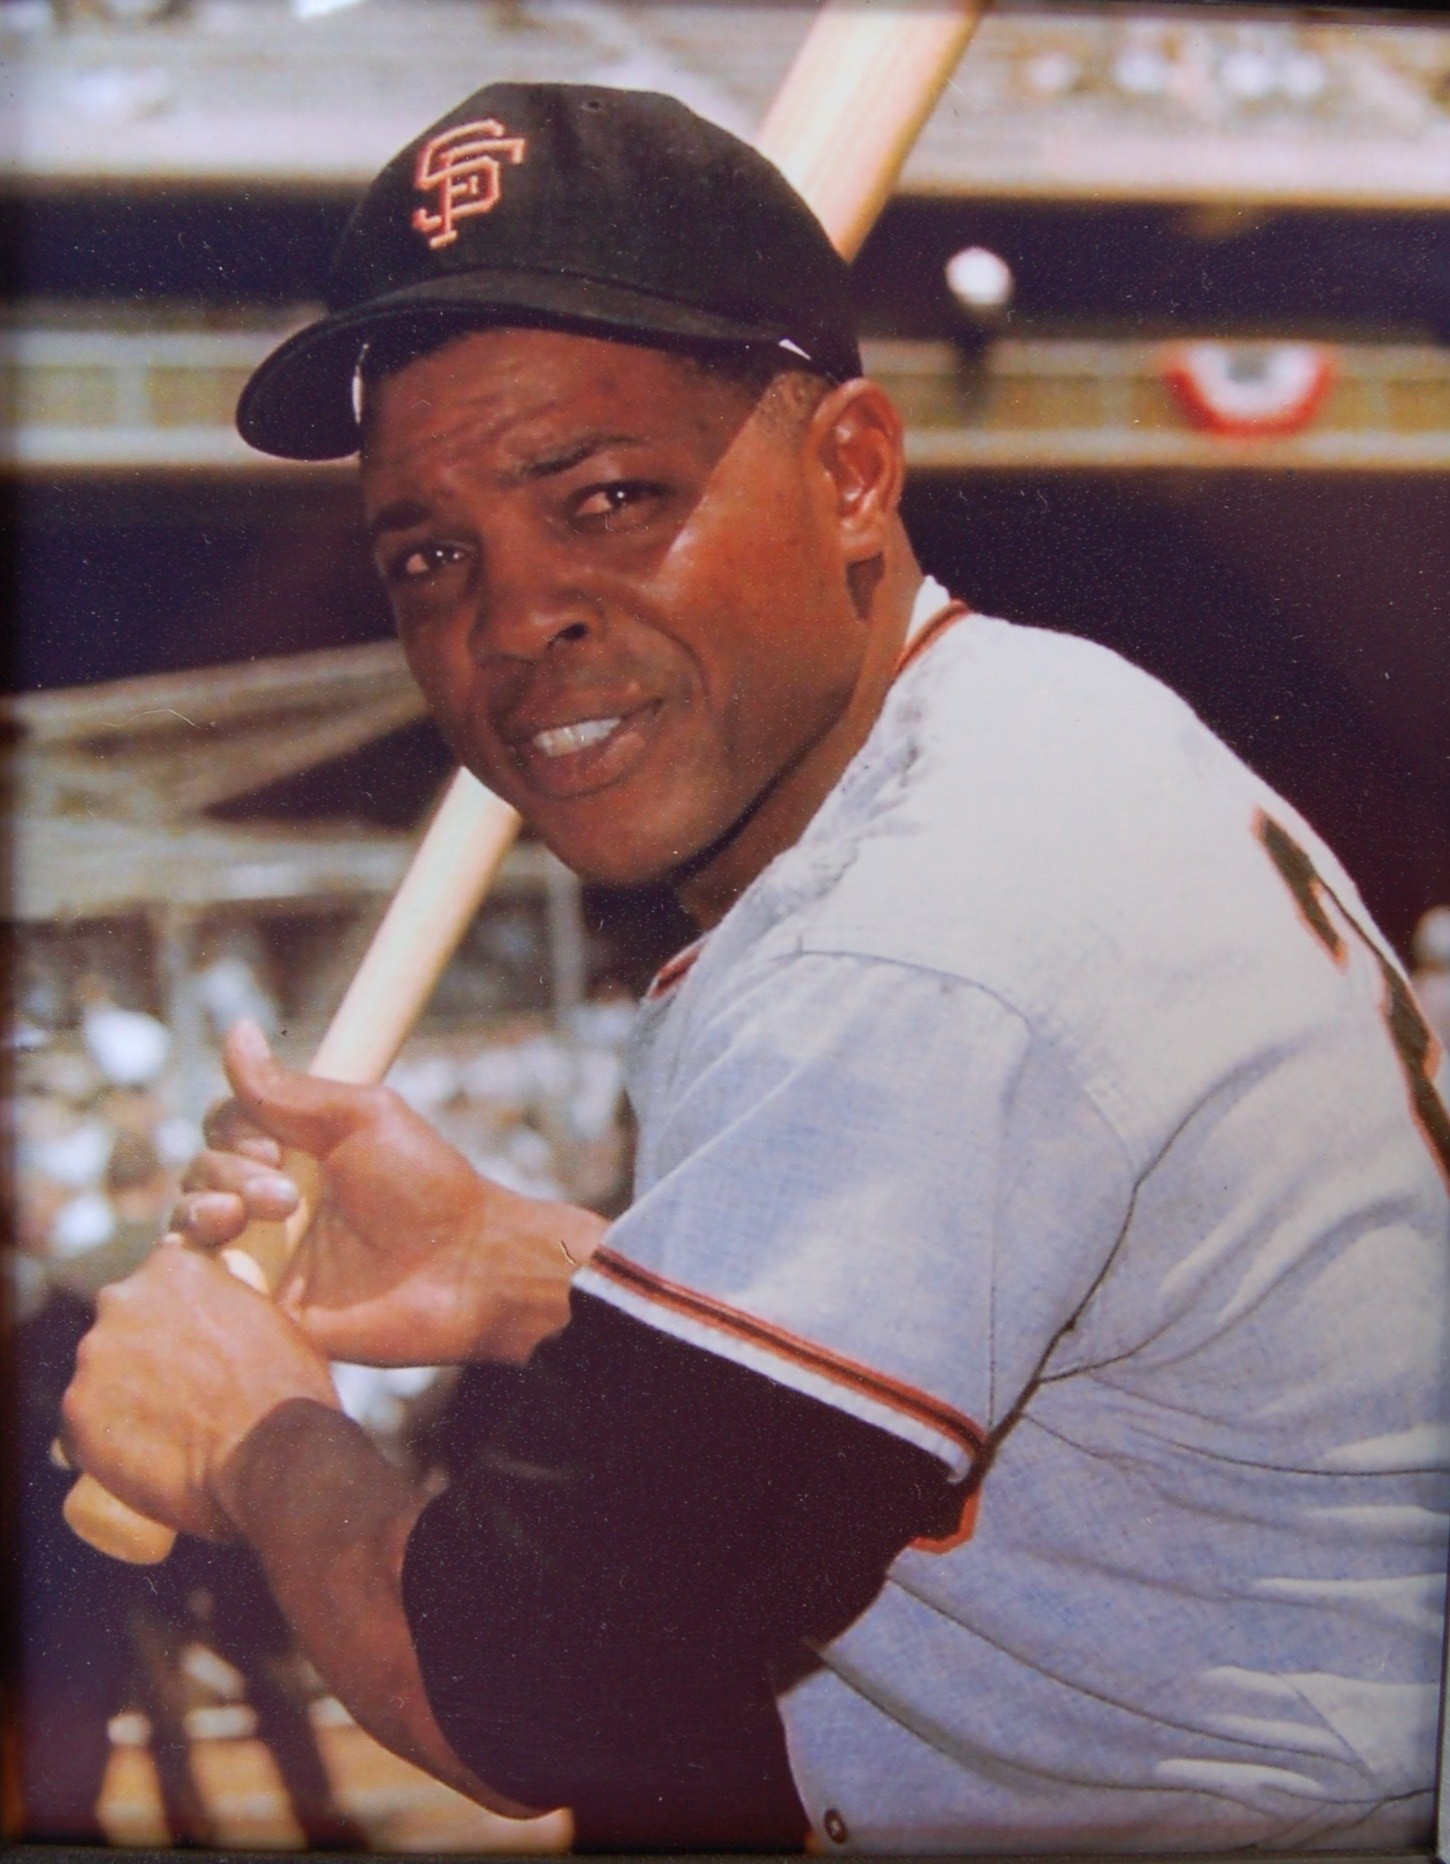 May 25, 1951: Willie Mays makes his major-league debut with Giants